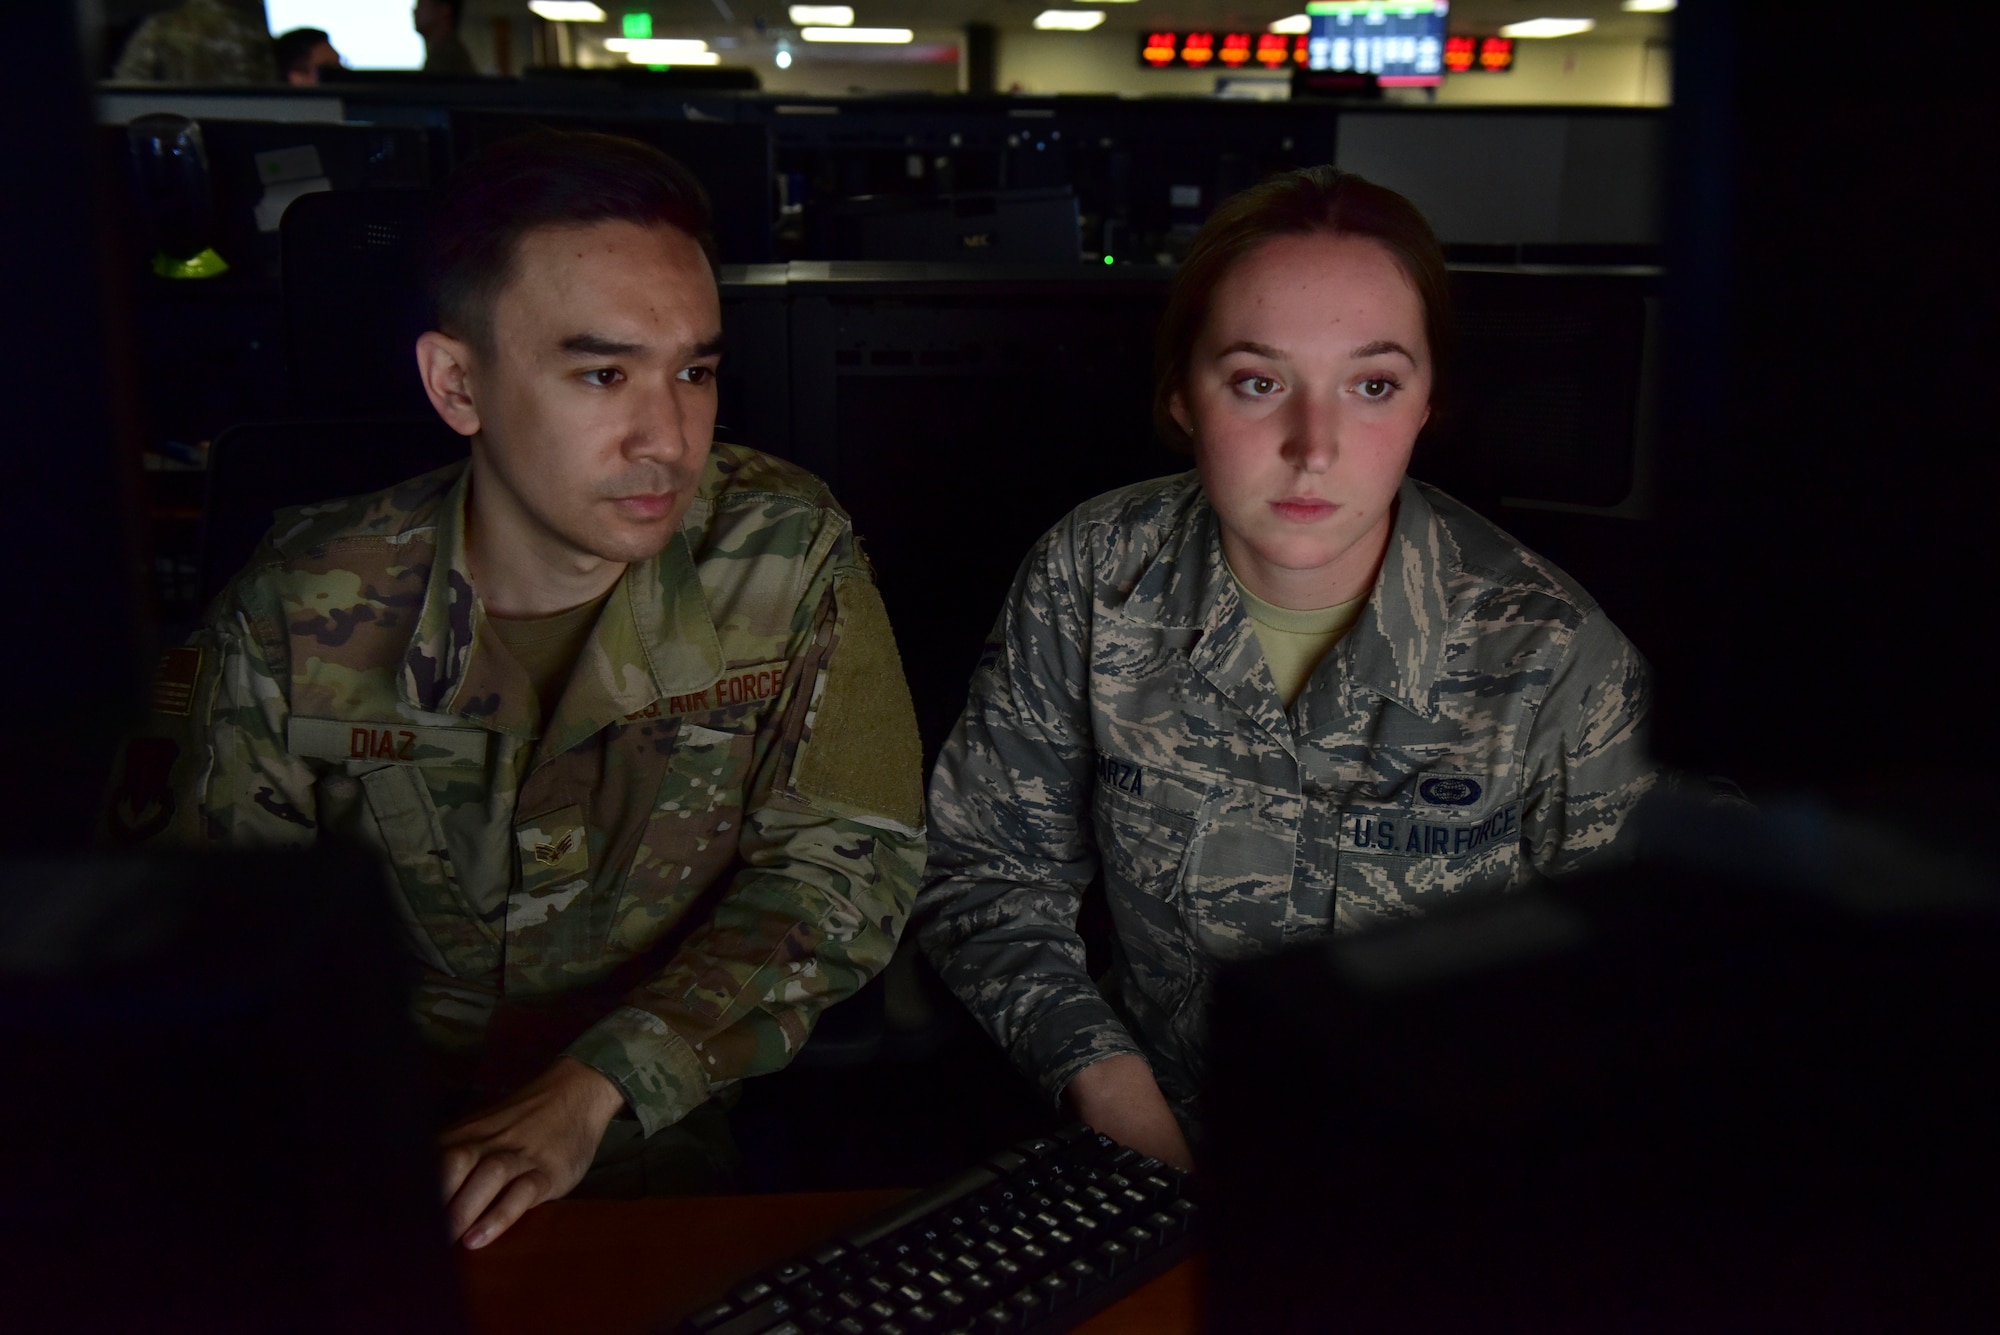 U.S. Air Force Airmen assigned to the 8th Intelligence Squadron conduct analysis at Joint Base Pearl Harbor-Hickam, Hawaii, Feb. 22, 2019. ISR Effects is an initiative that helps connect intelligence analysts to the outcome of their efforts. (U.S. Air Force photo by Staff Sgt. Eboni Prince)